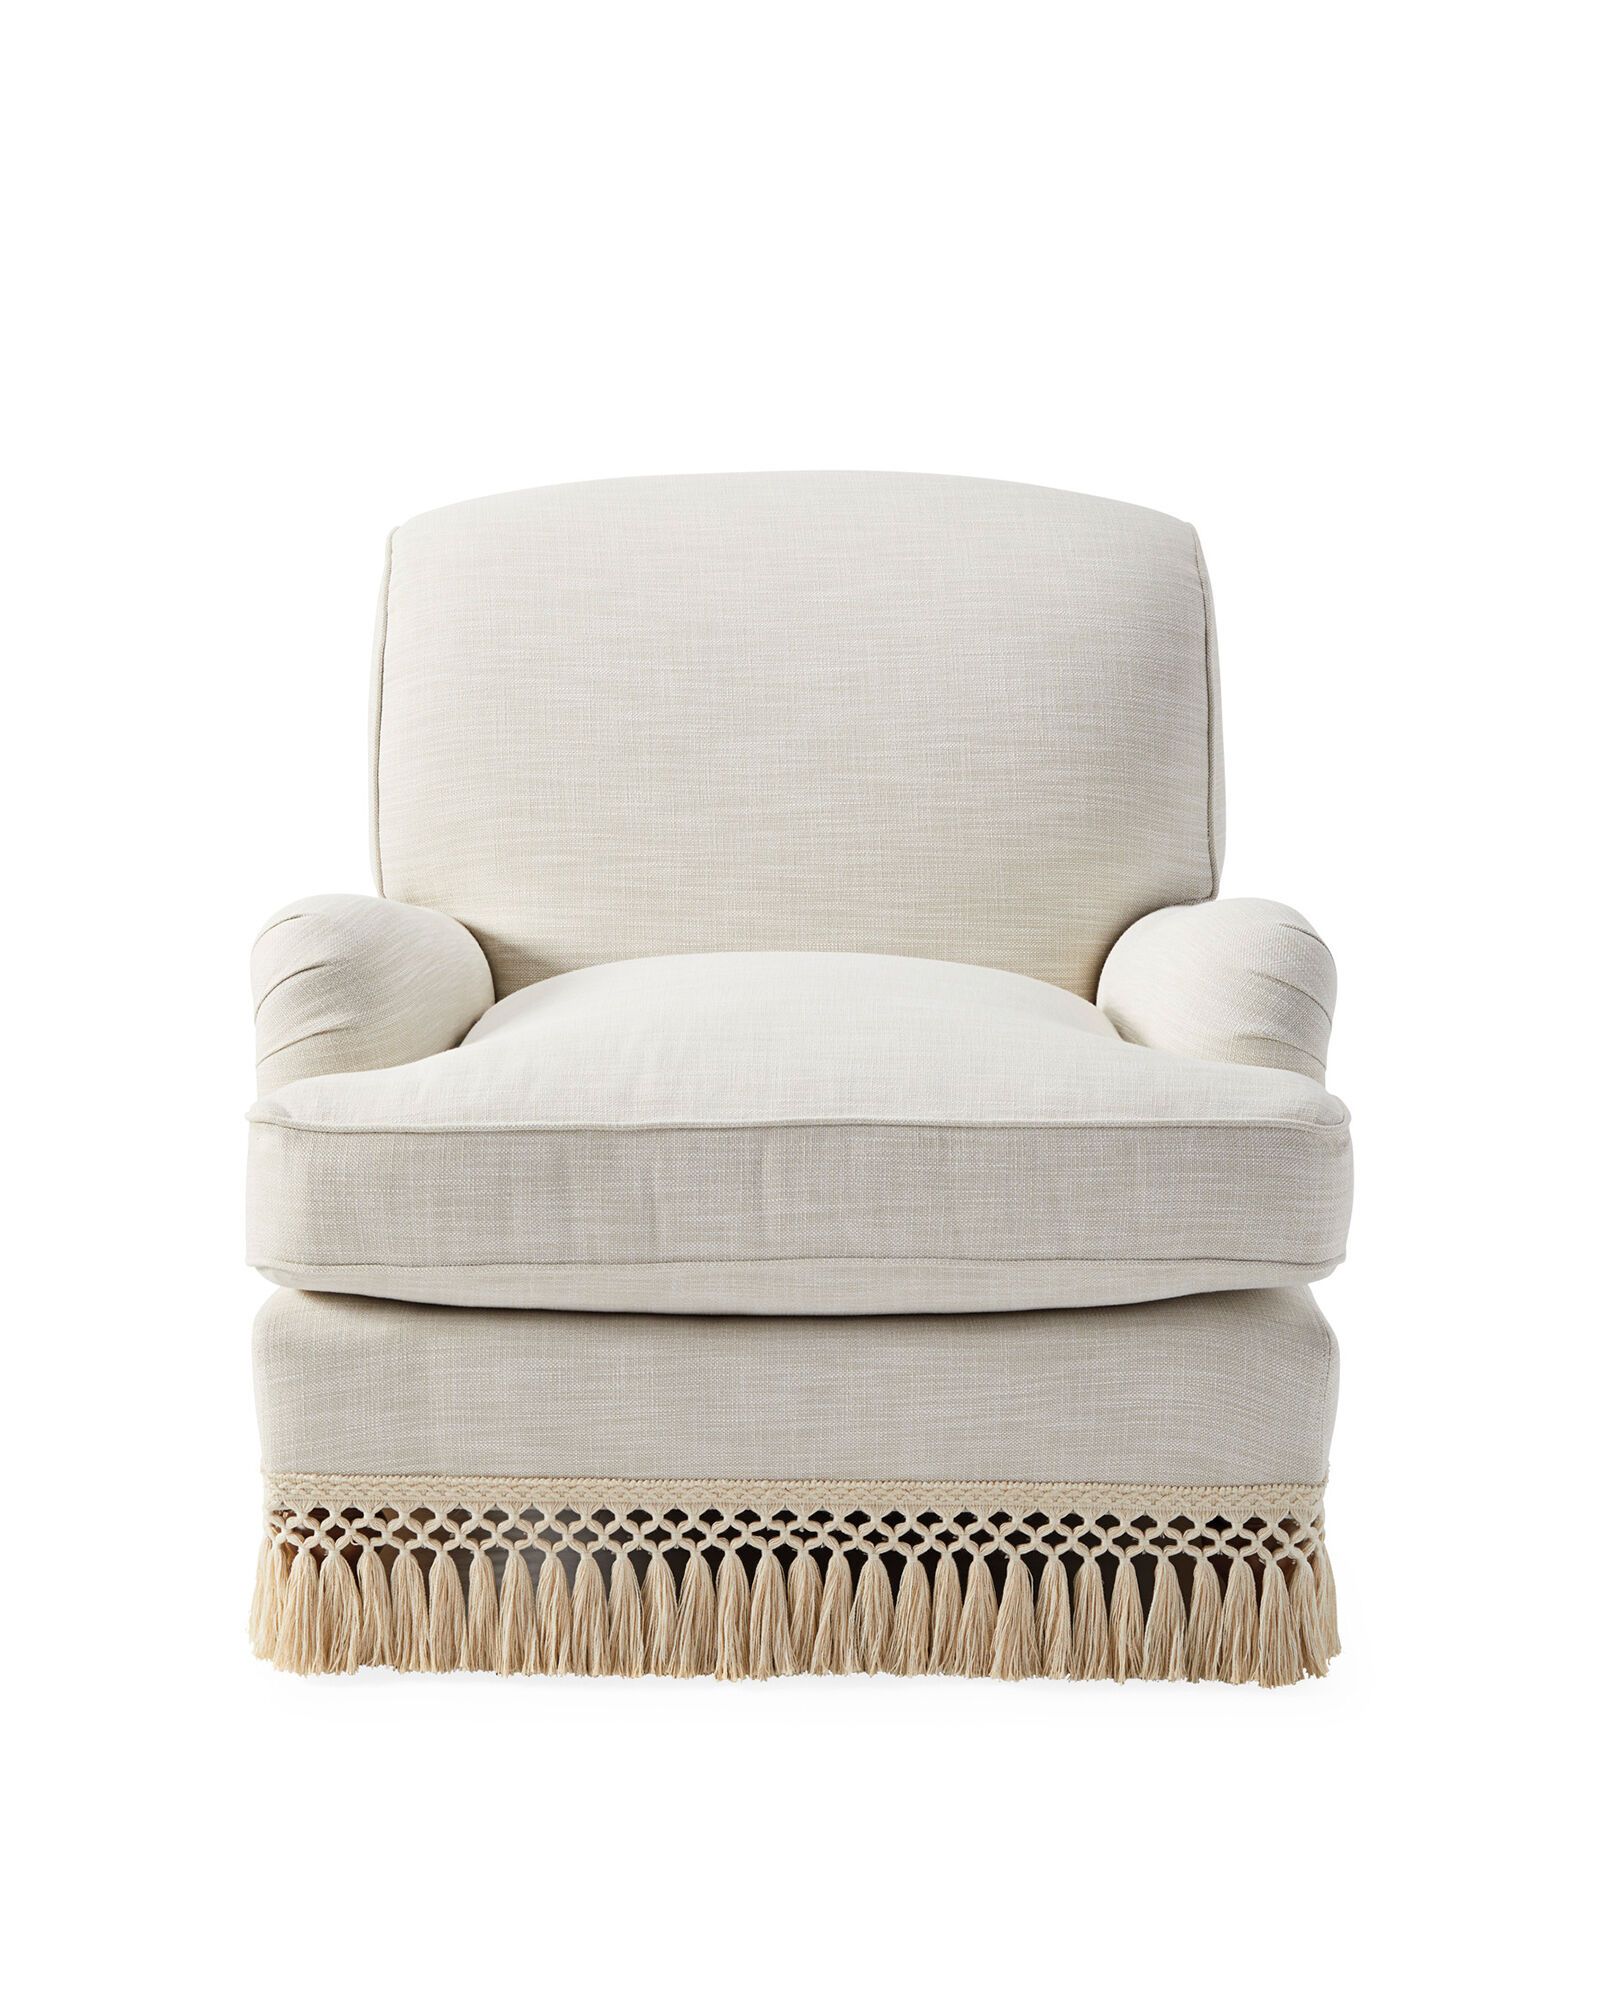 Miramar Fringed Chair | Serena and Lily